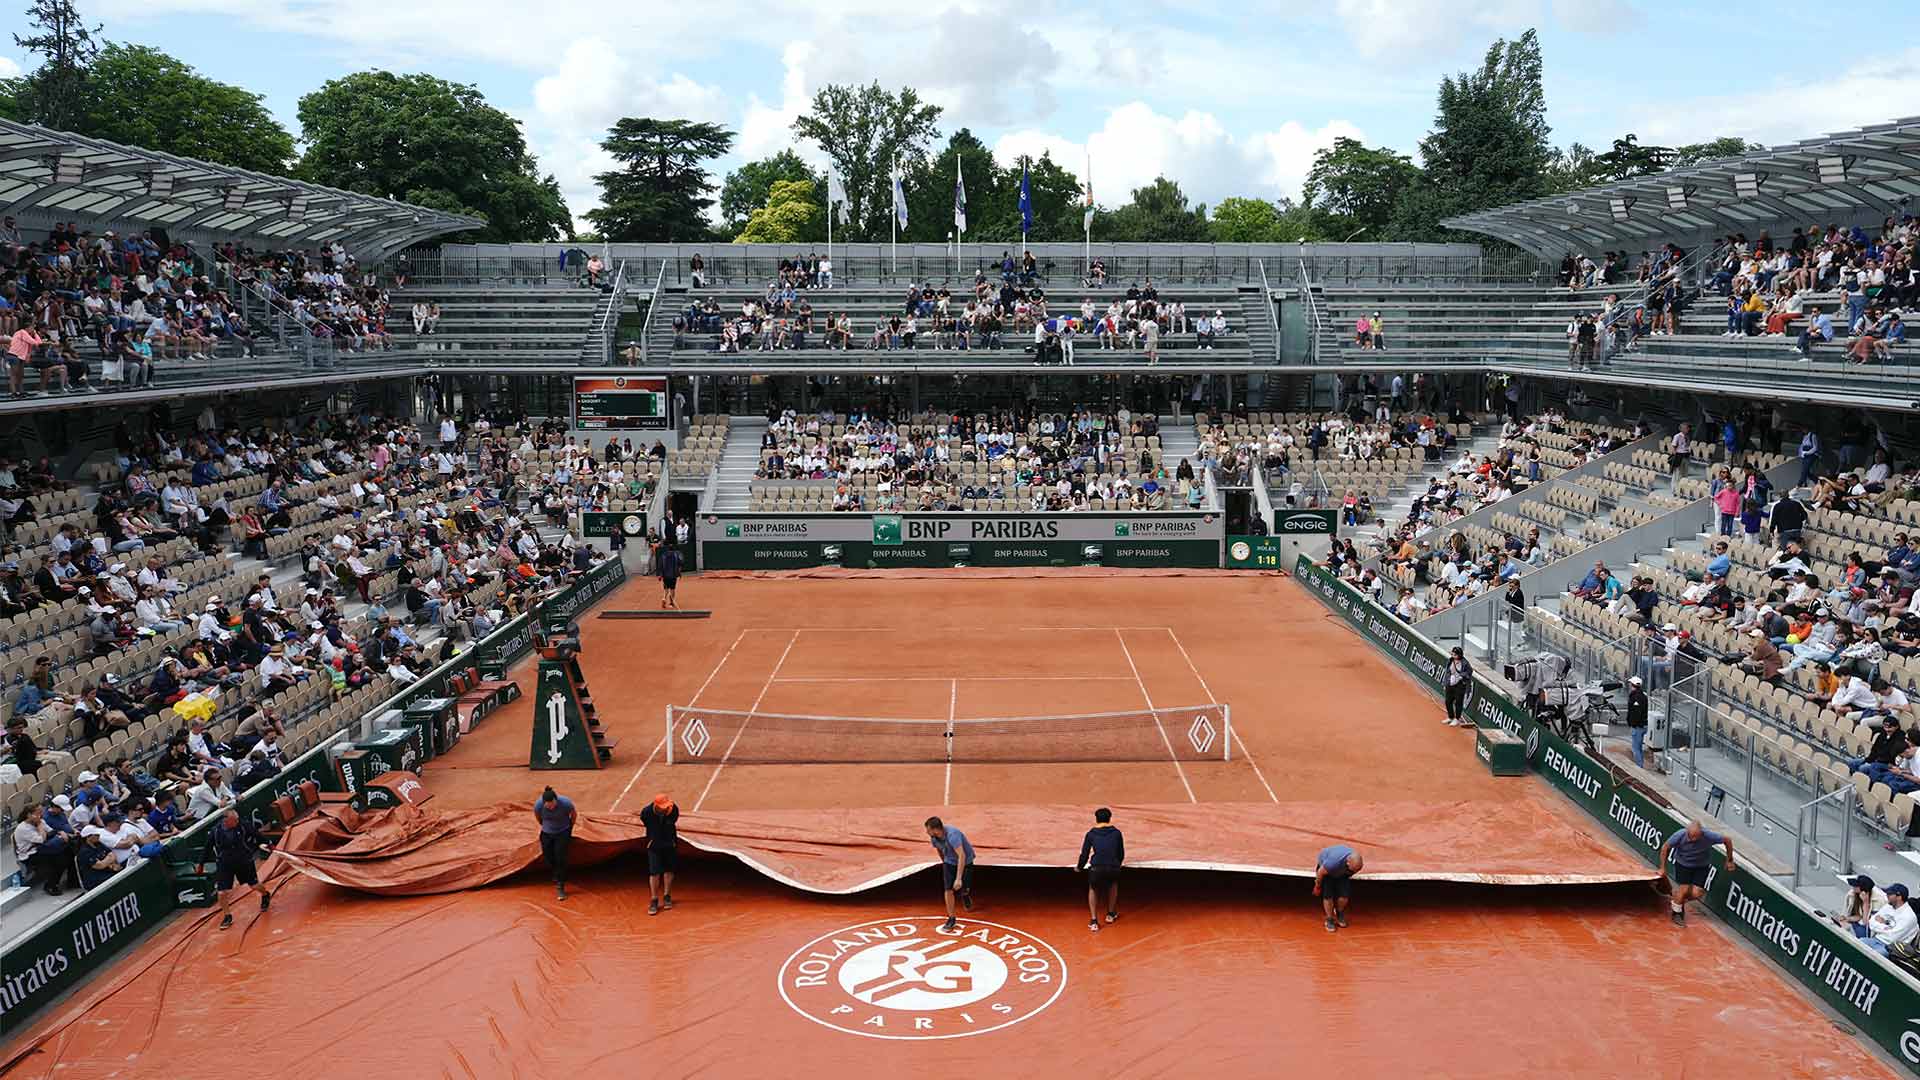 Roland Garros Day 3 in full swing after rain